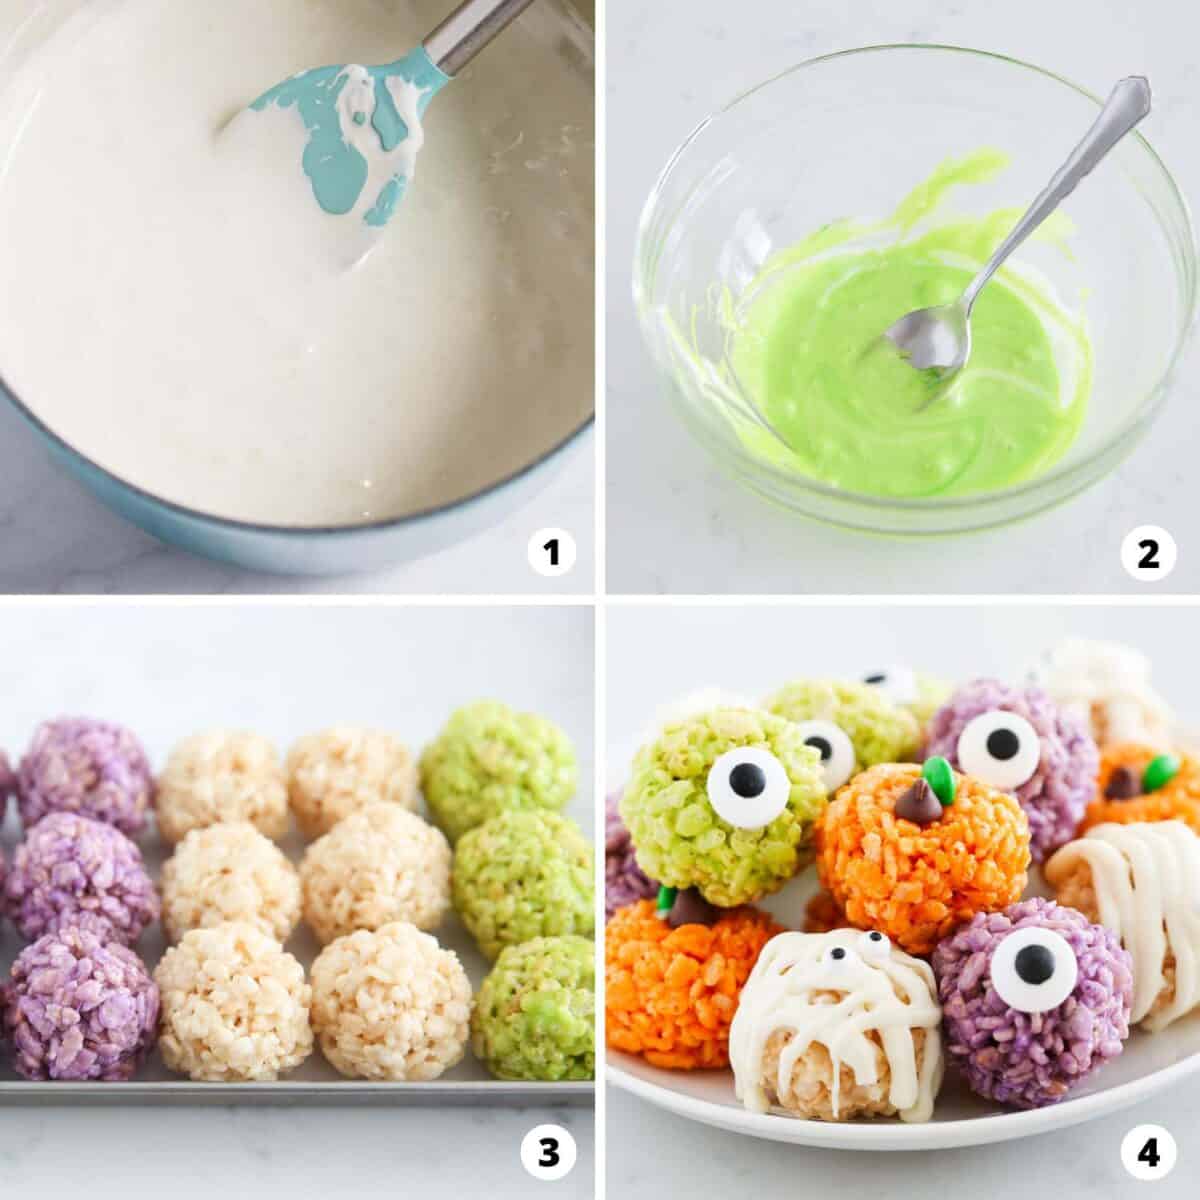 Showing how to make Halloween rice krispie treats in a 4 step collage.